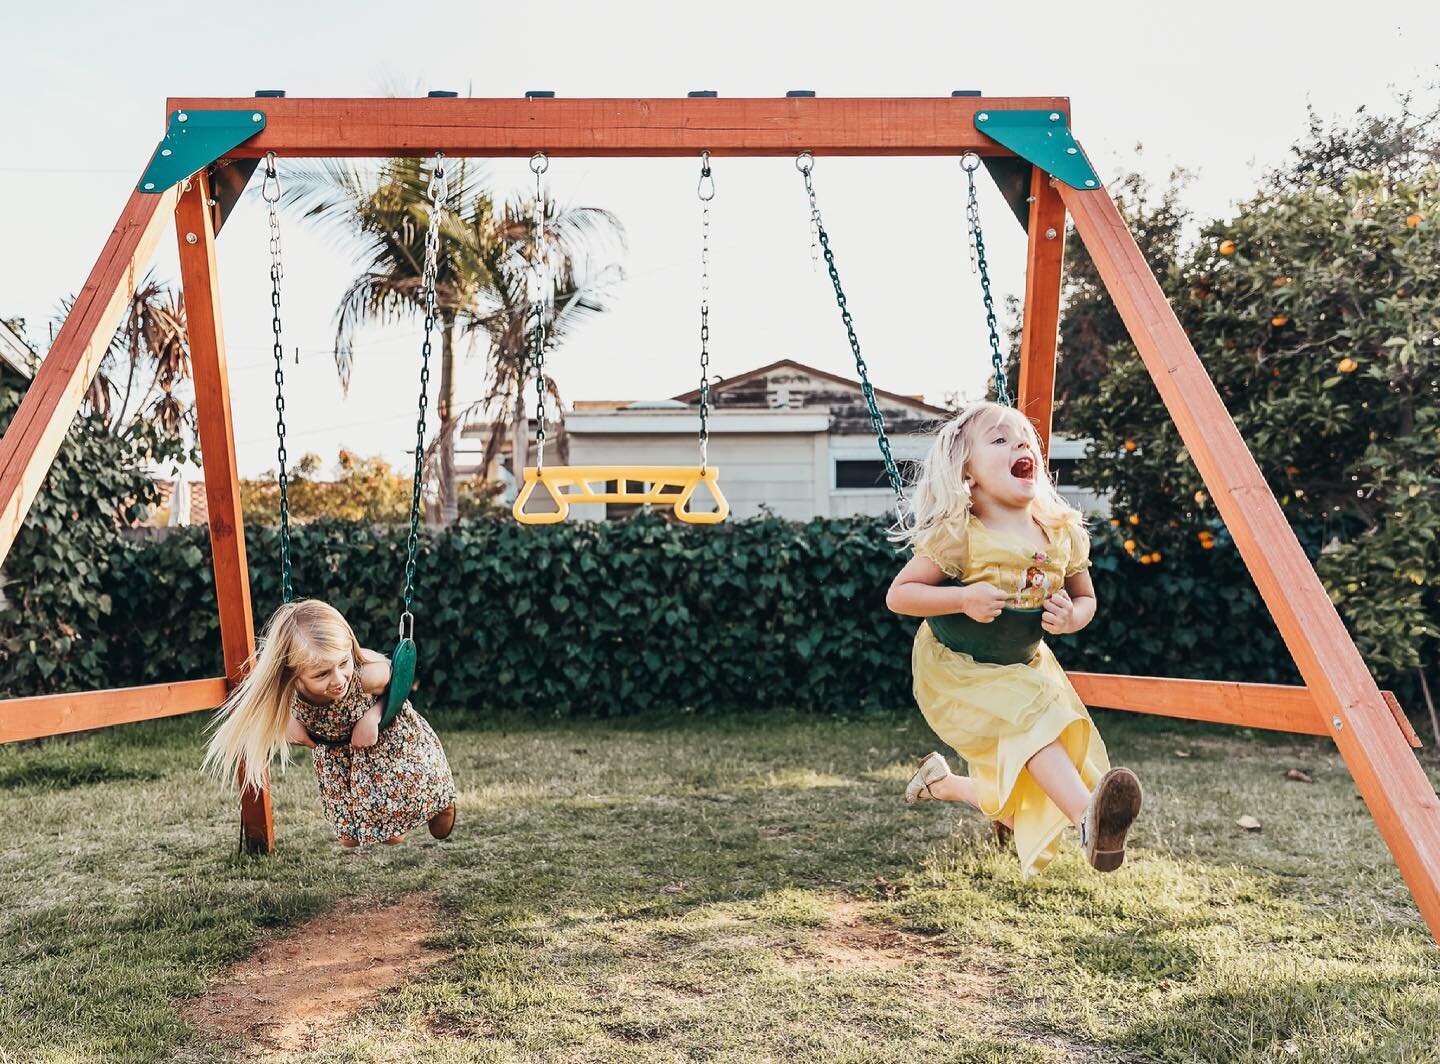 Fun kids + their own backyard + golden hour = my wildest dreams came true 🥰📷💚
Who is going to make my dreams come true next? Slip n' slide into my DMs. ⁠⁠
⁠⁠
Welcome to our #SanDiegoLifestylePhotographyEditingLoop⁠⁠
.⁠⁠
We are a group of San Diego